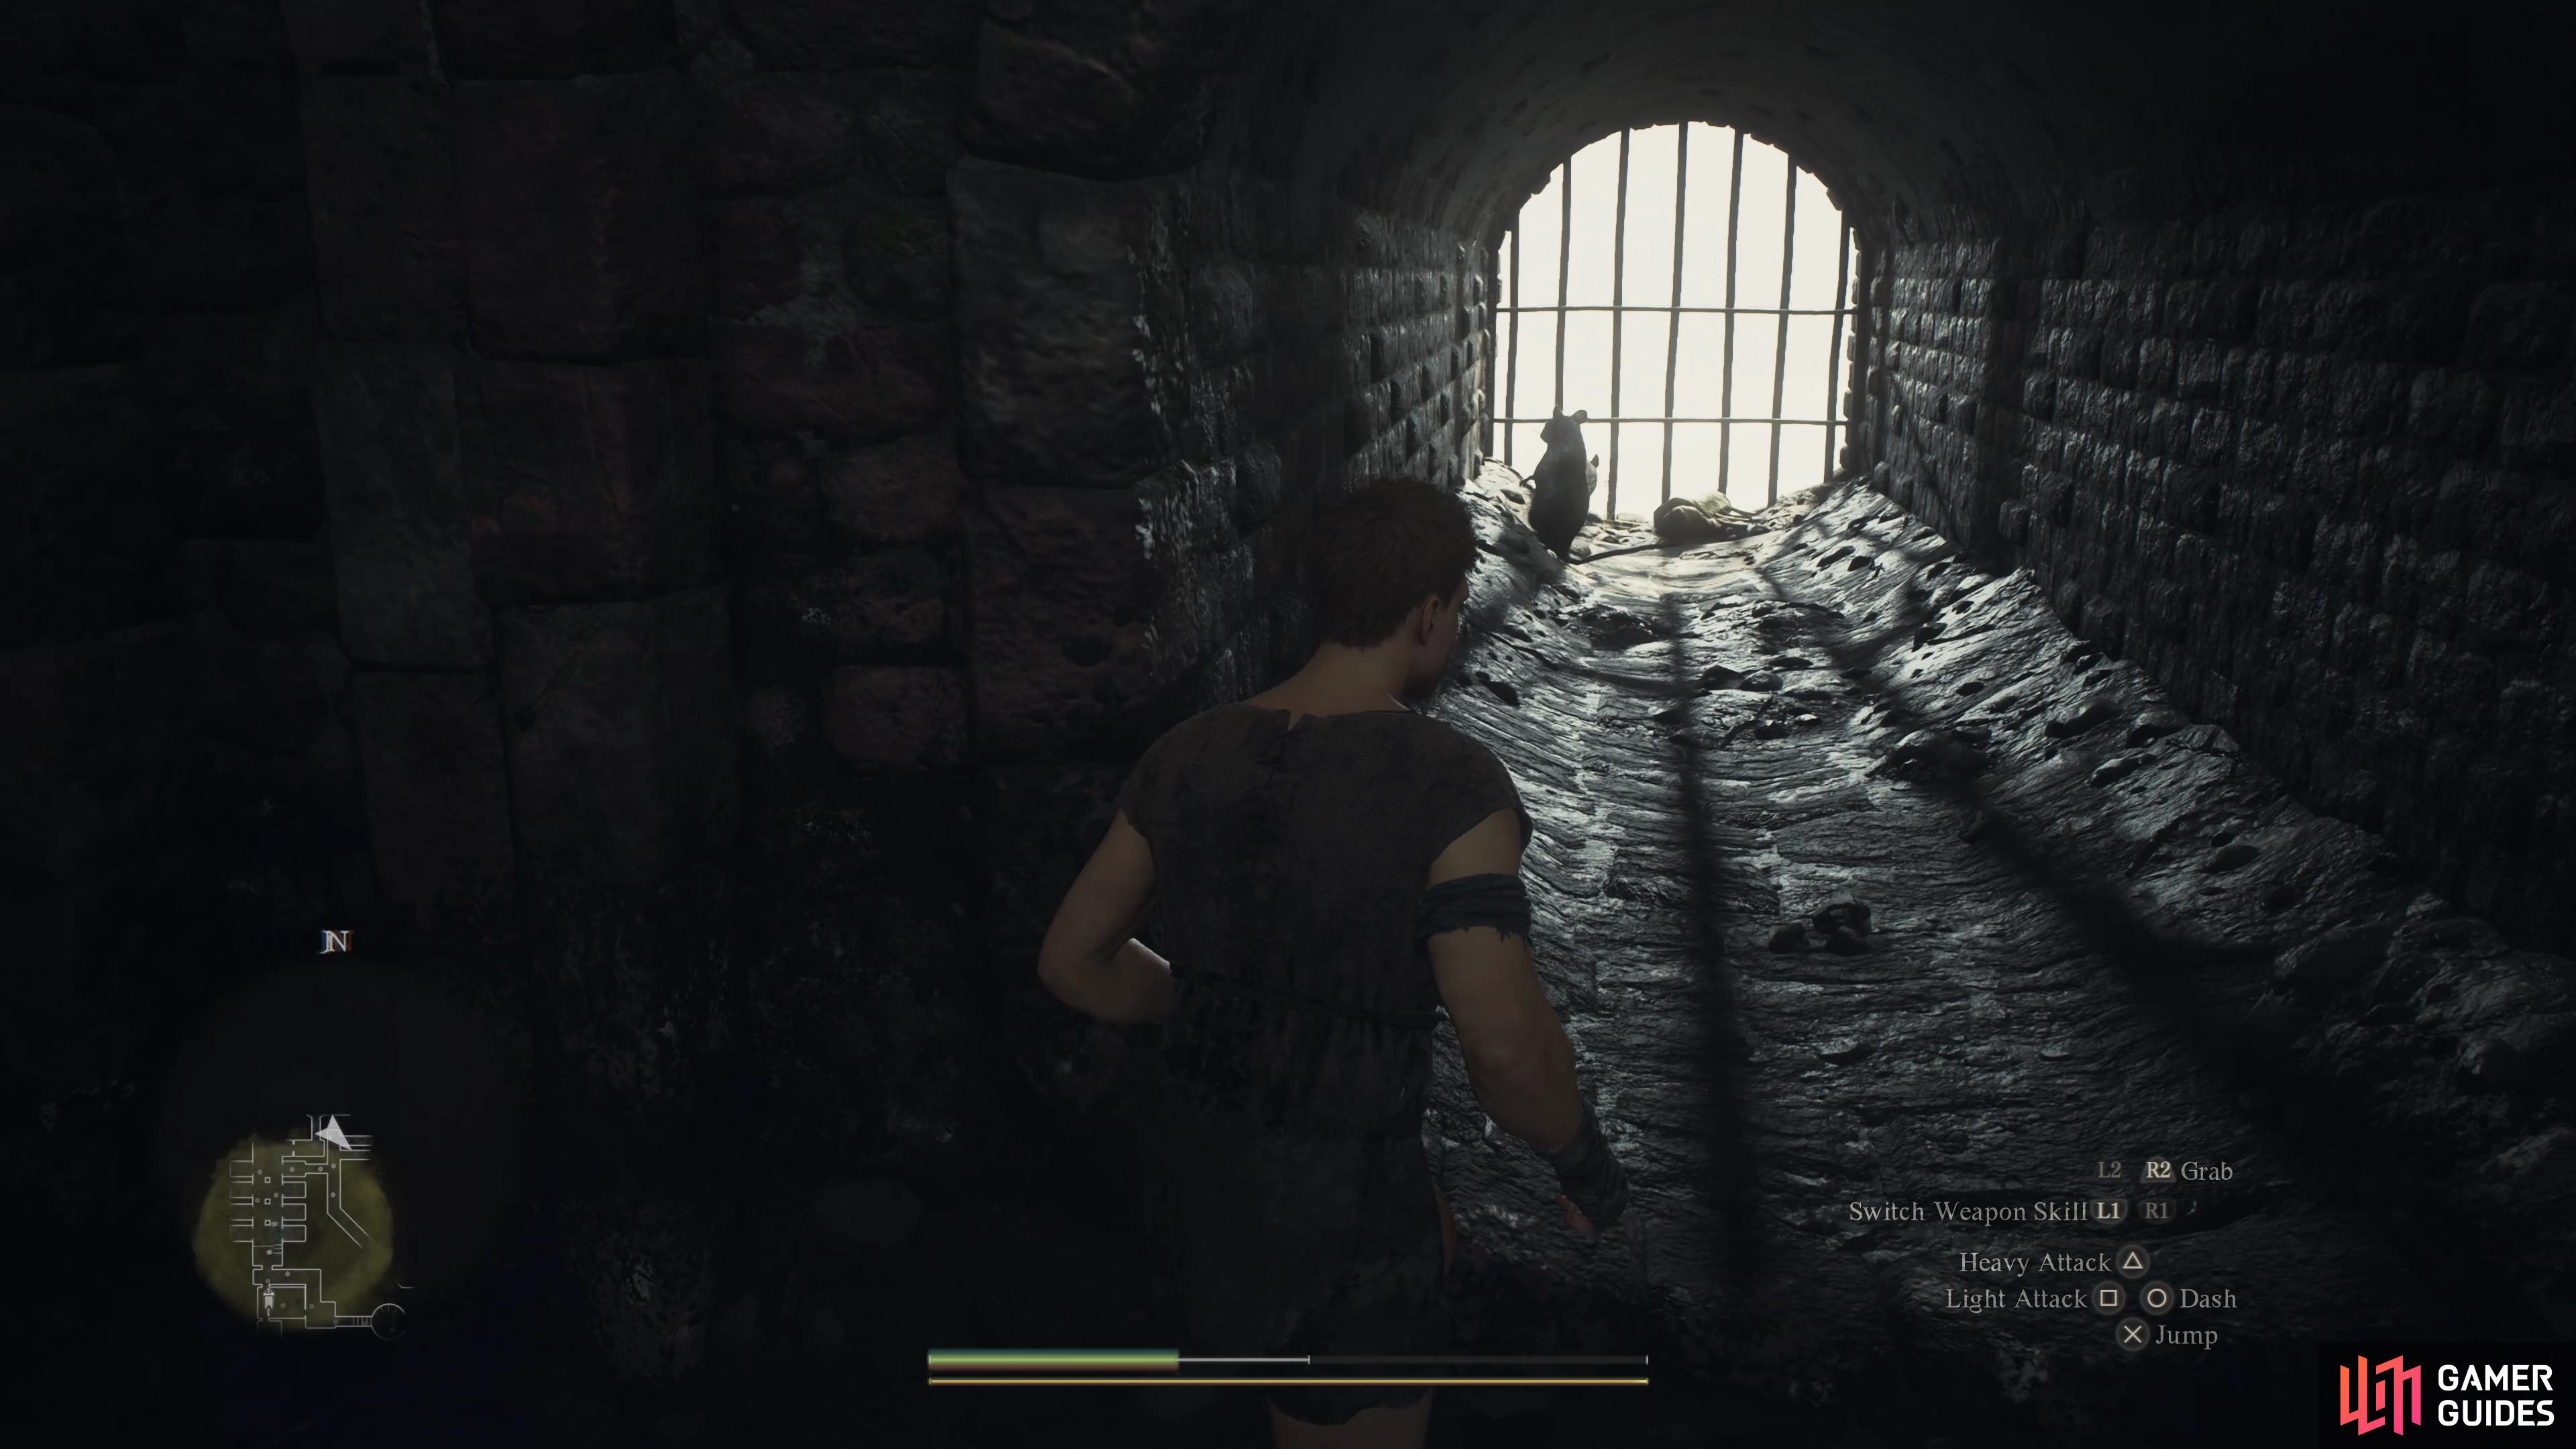 There are a few ways to escape prison (gaol) in Dragon’s Dogma 2, but the sewers are the easiest and cheapest.